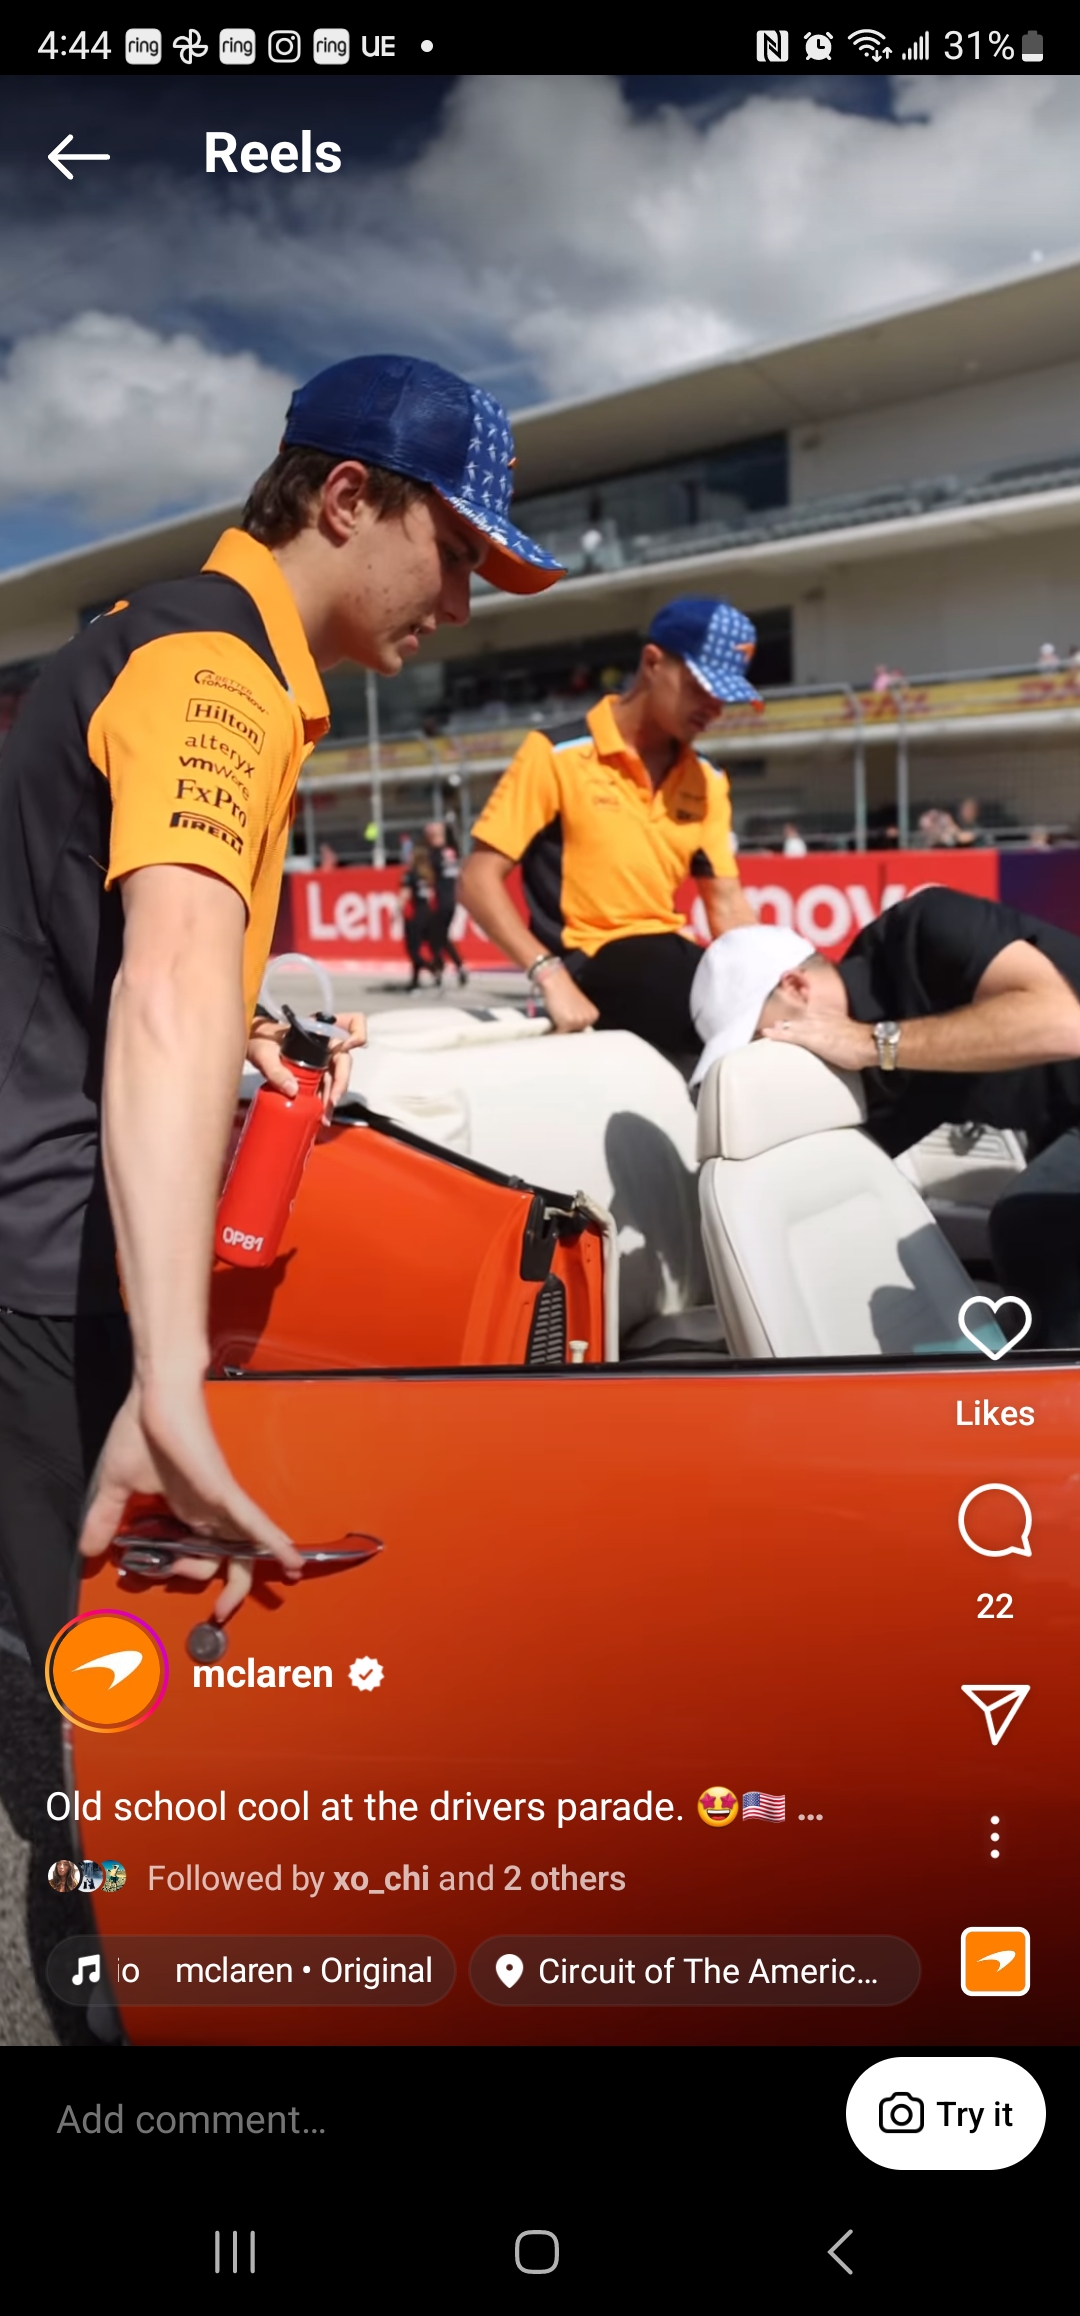 A person in a McLaren racing team uniform adjusts a protective cover on a sports car during a home buying event parade.